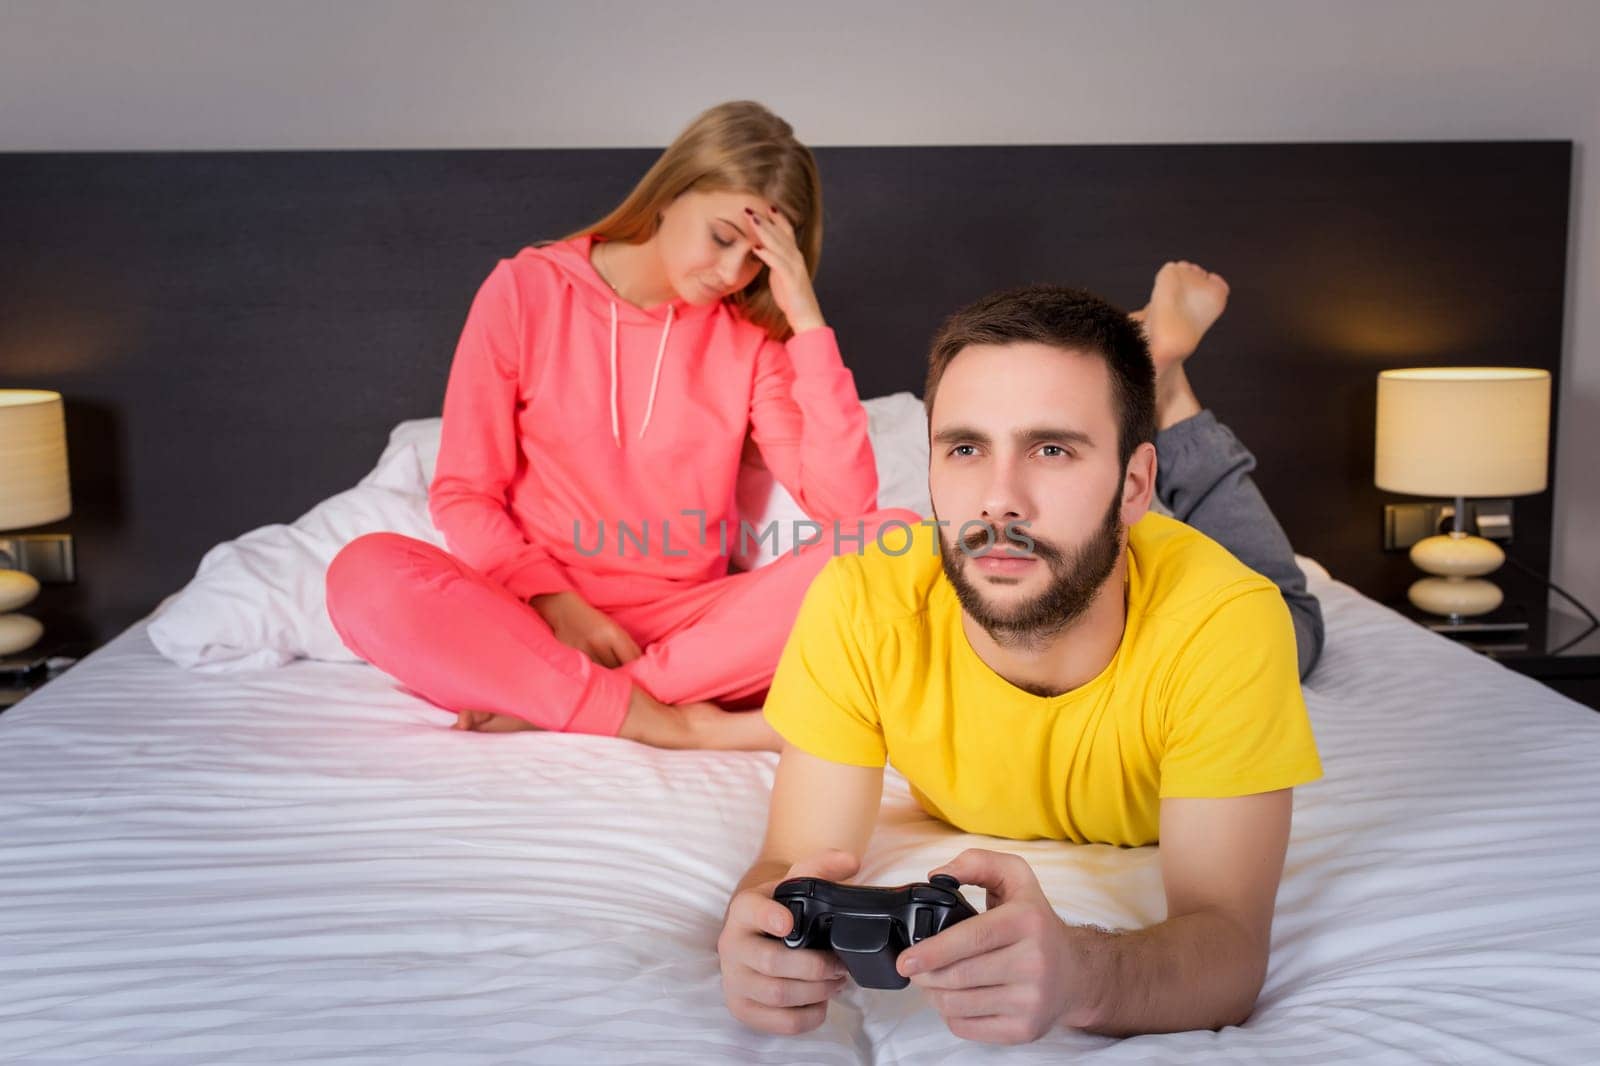 Young couple having playing videogames in bed. Man playing video game, upset woman on background.